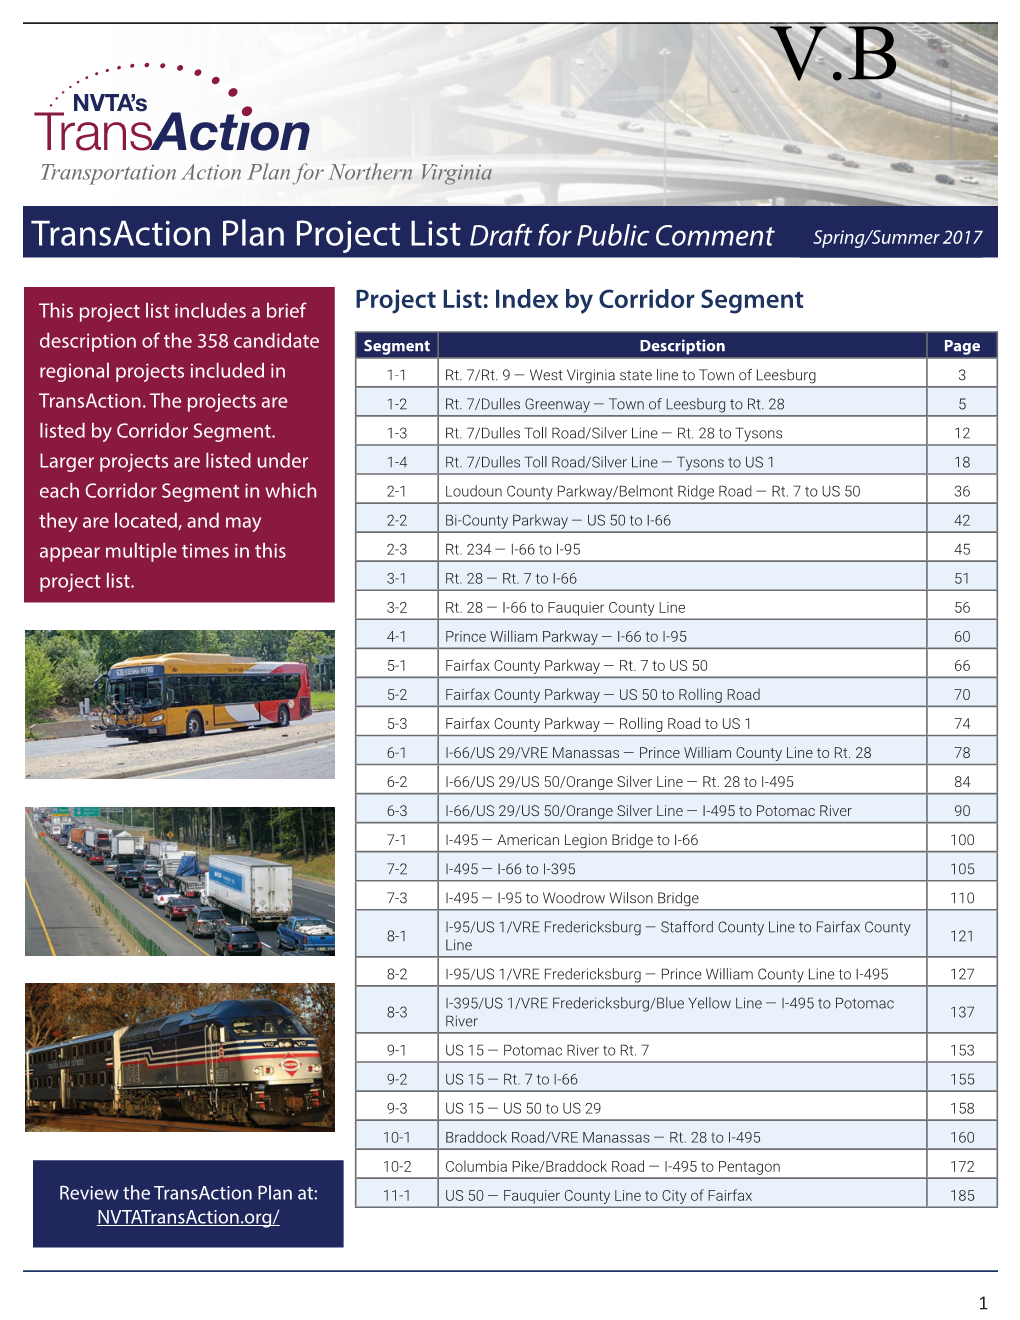 Transaction Plan Project List Draft for Public Comment Spring/Summer 2017